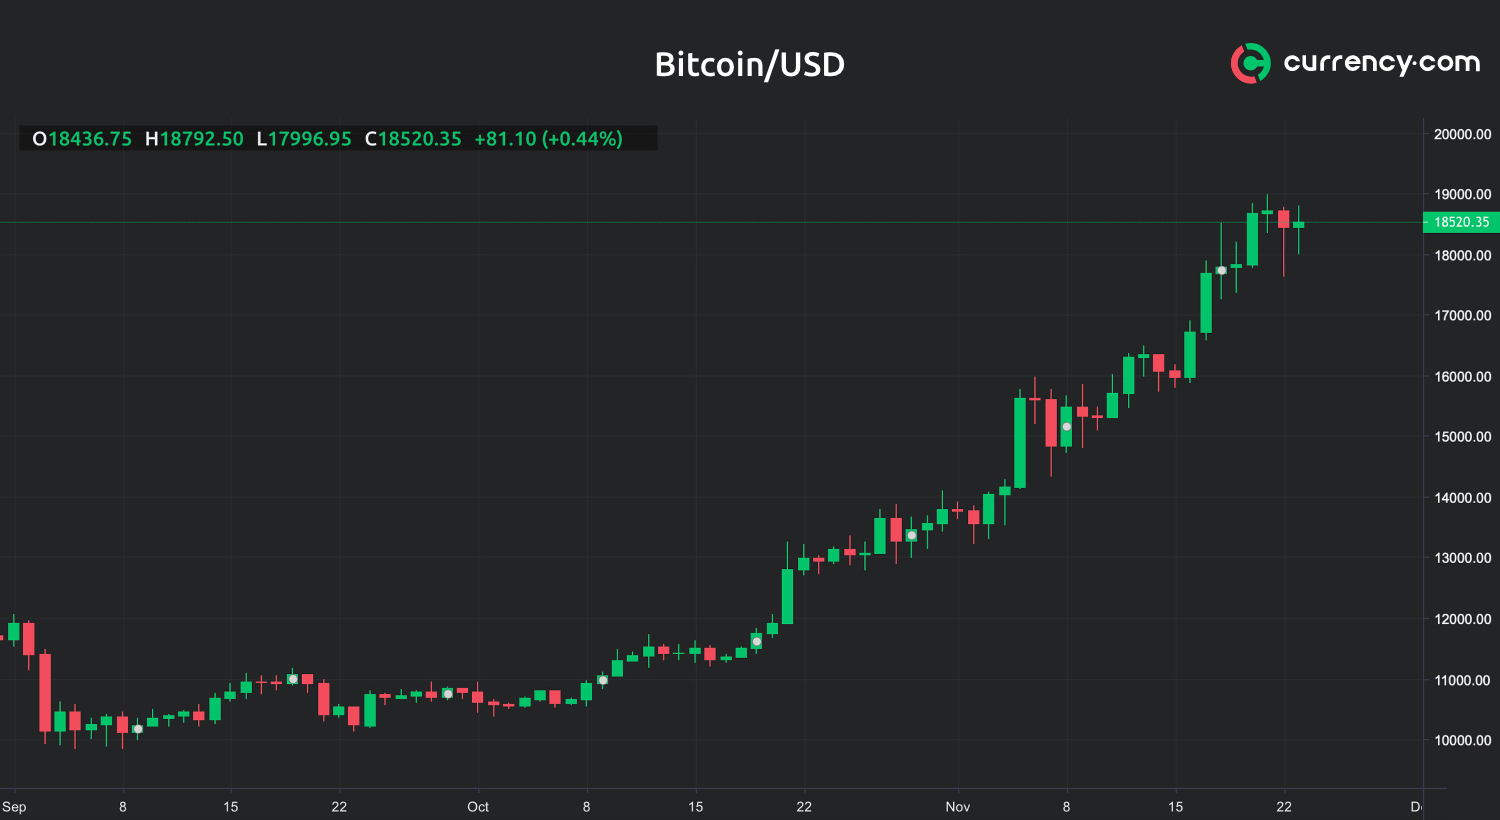 On the road to $15,000, the Bitcoin price has already been impact by trade war maneuverings